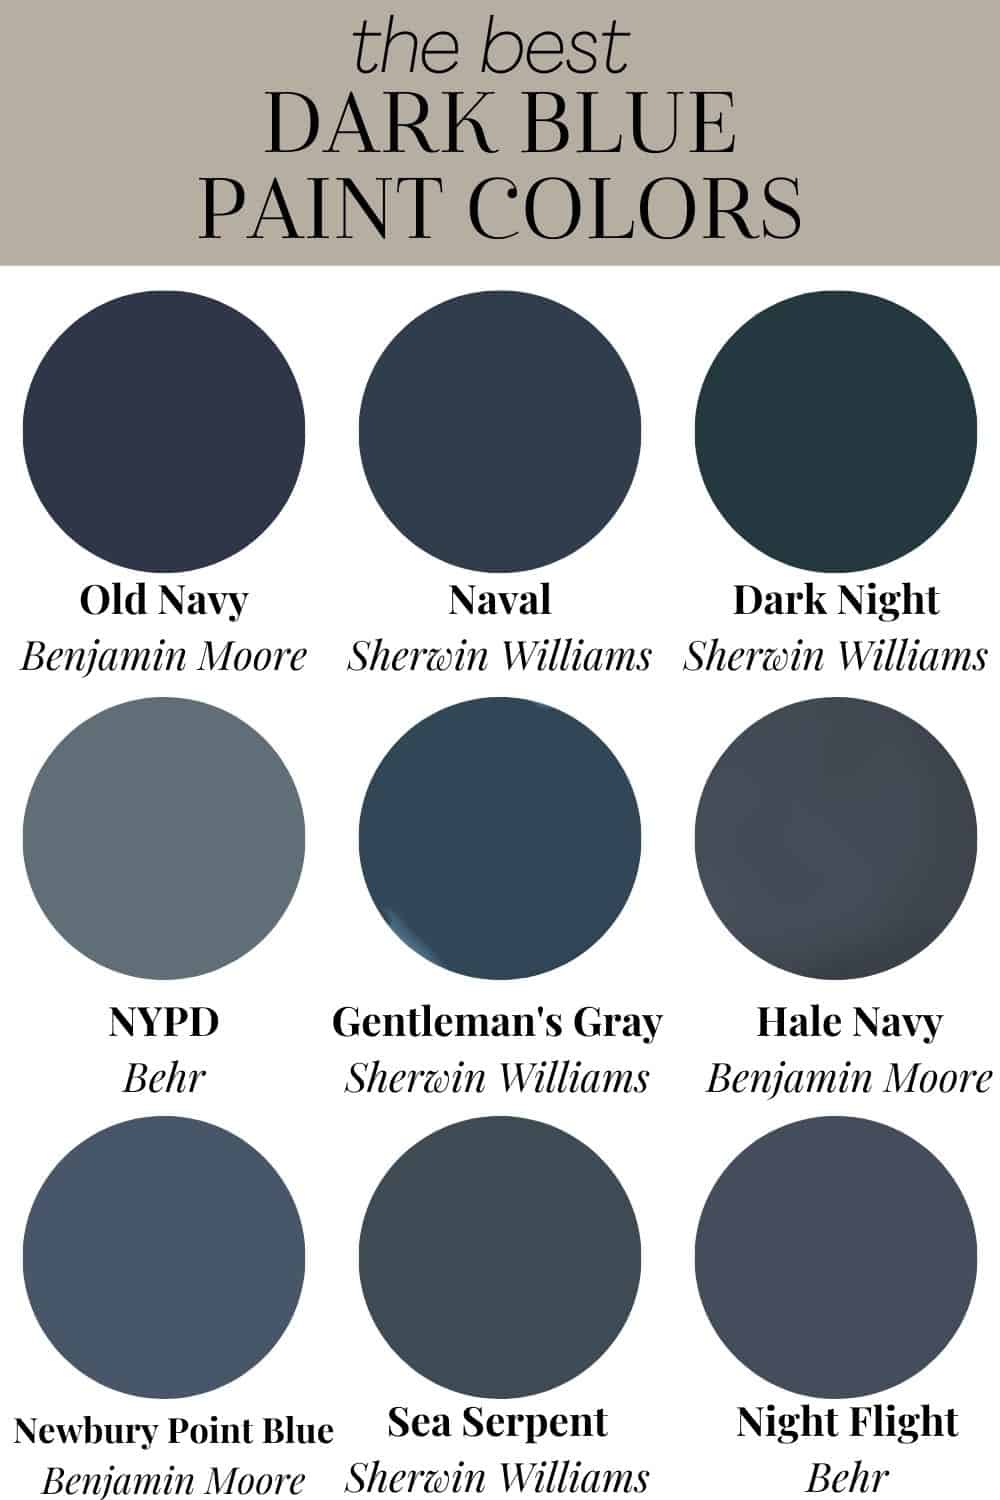 The Best Dark and Moody Paint Colors for Cabinets